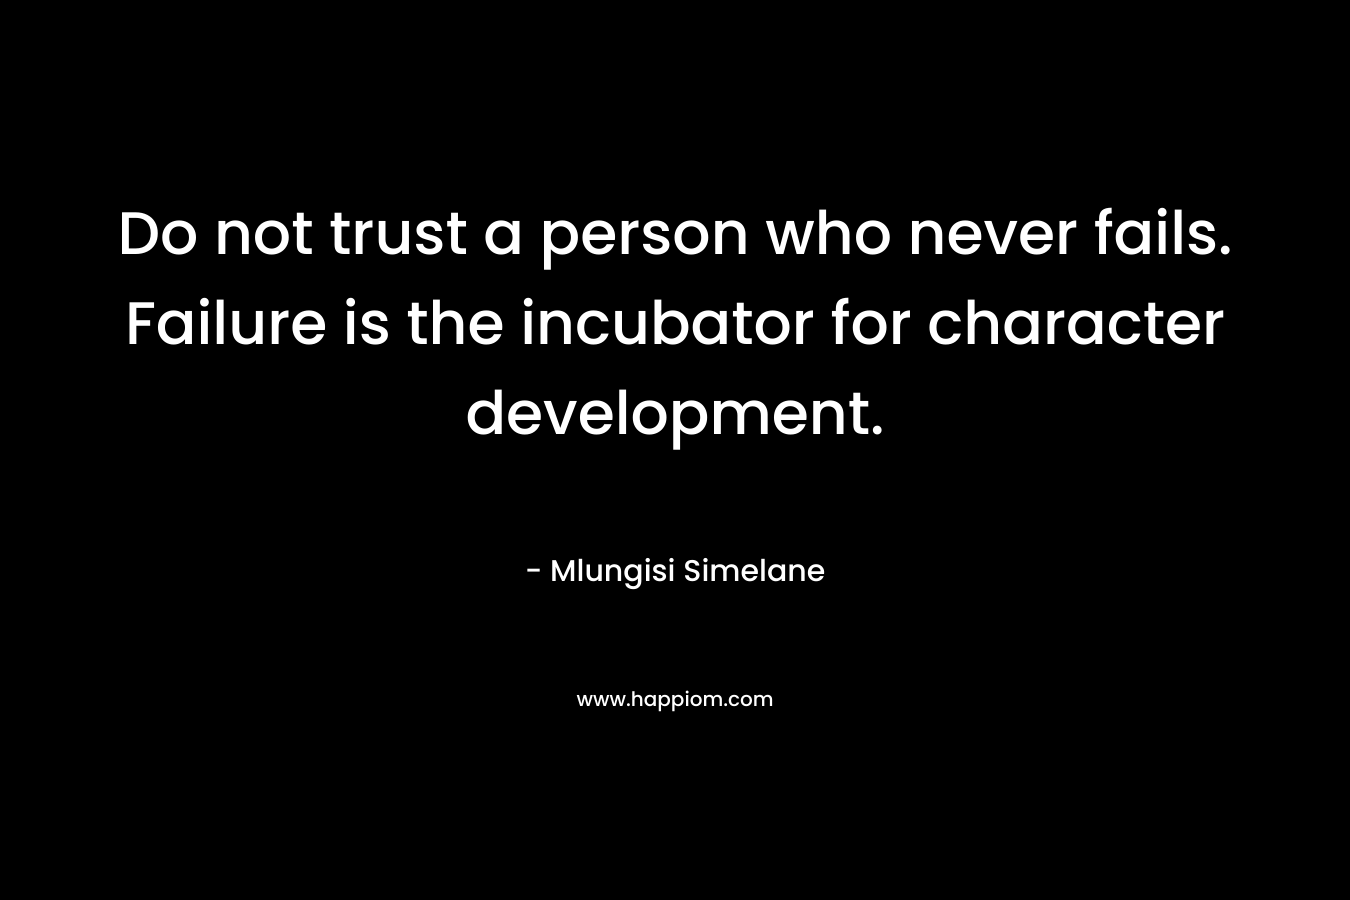 Do not trust a person who never fails. Failure is the incubator for character development. – Mlungisi Simelane